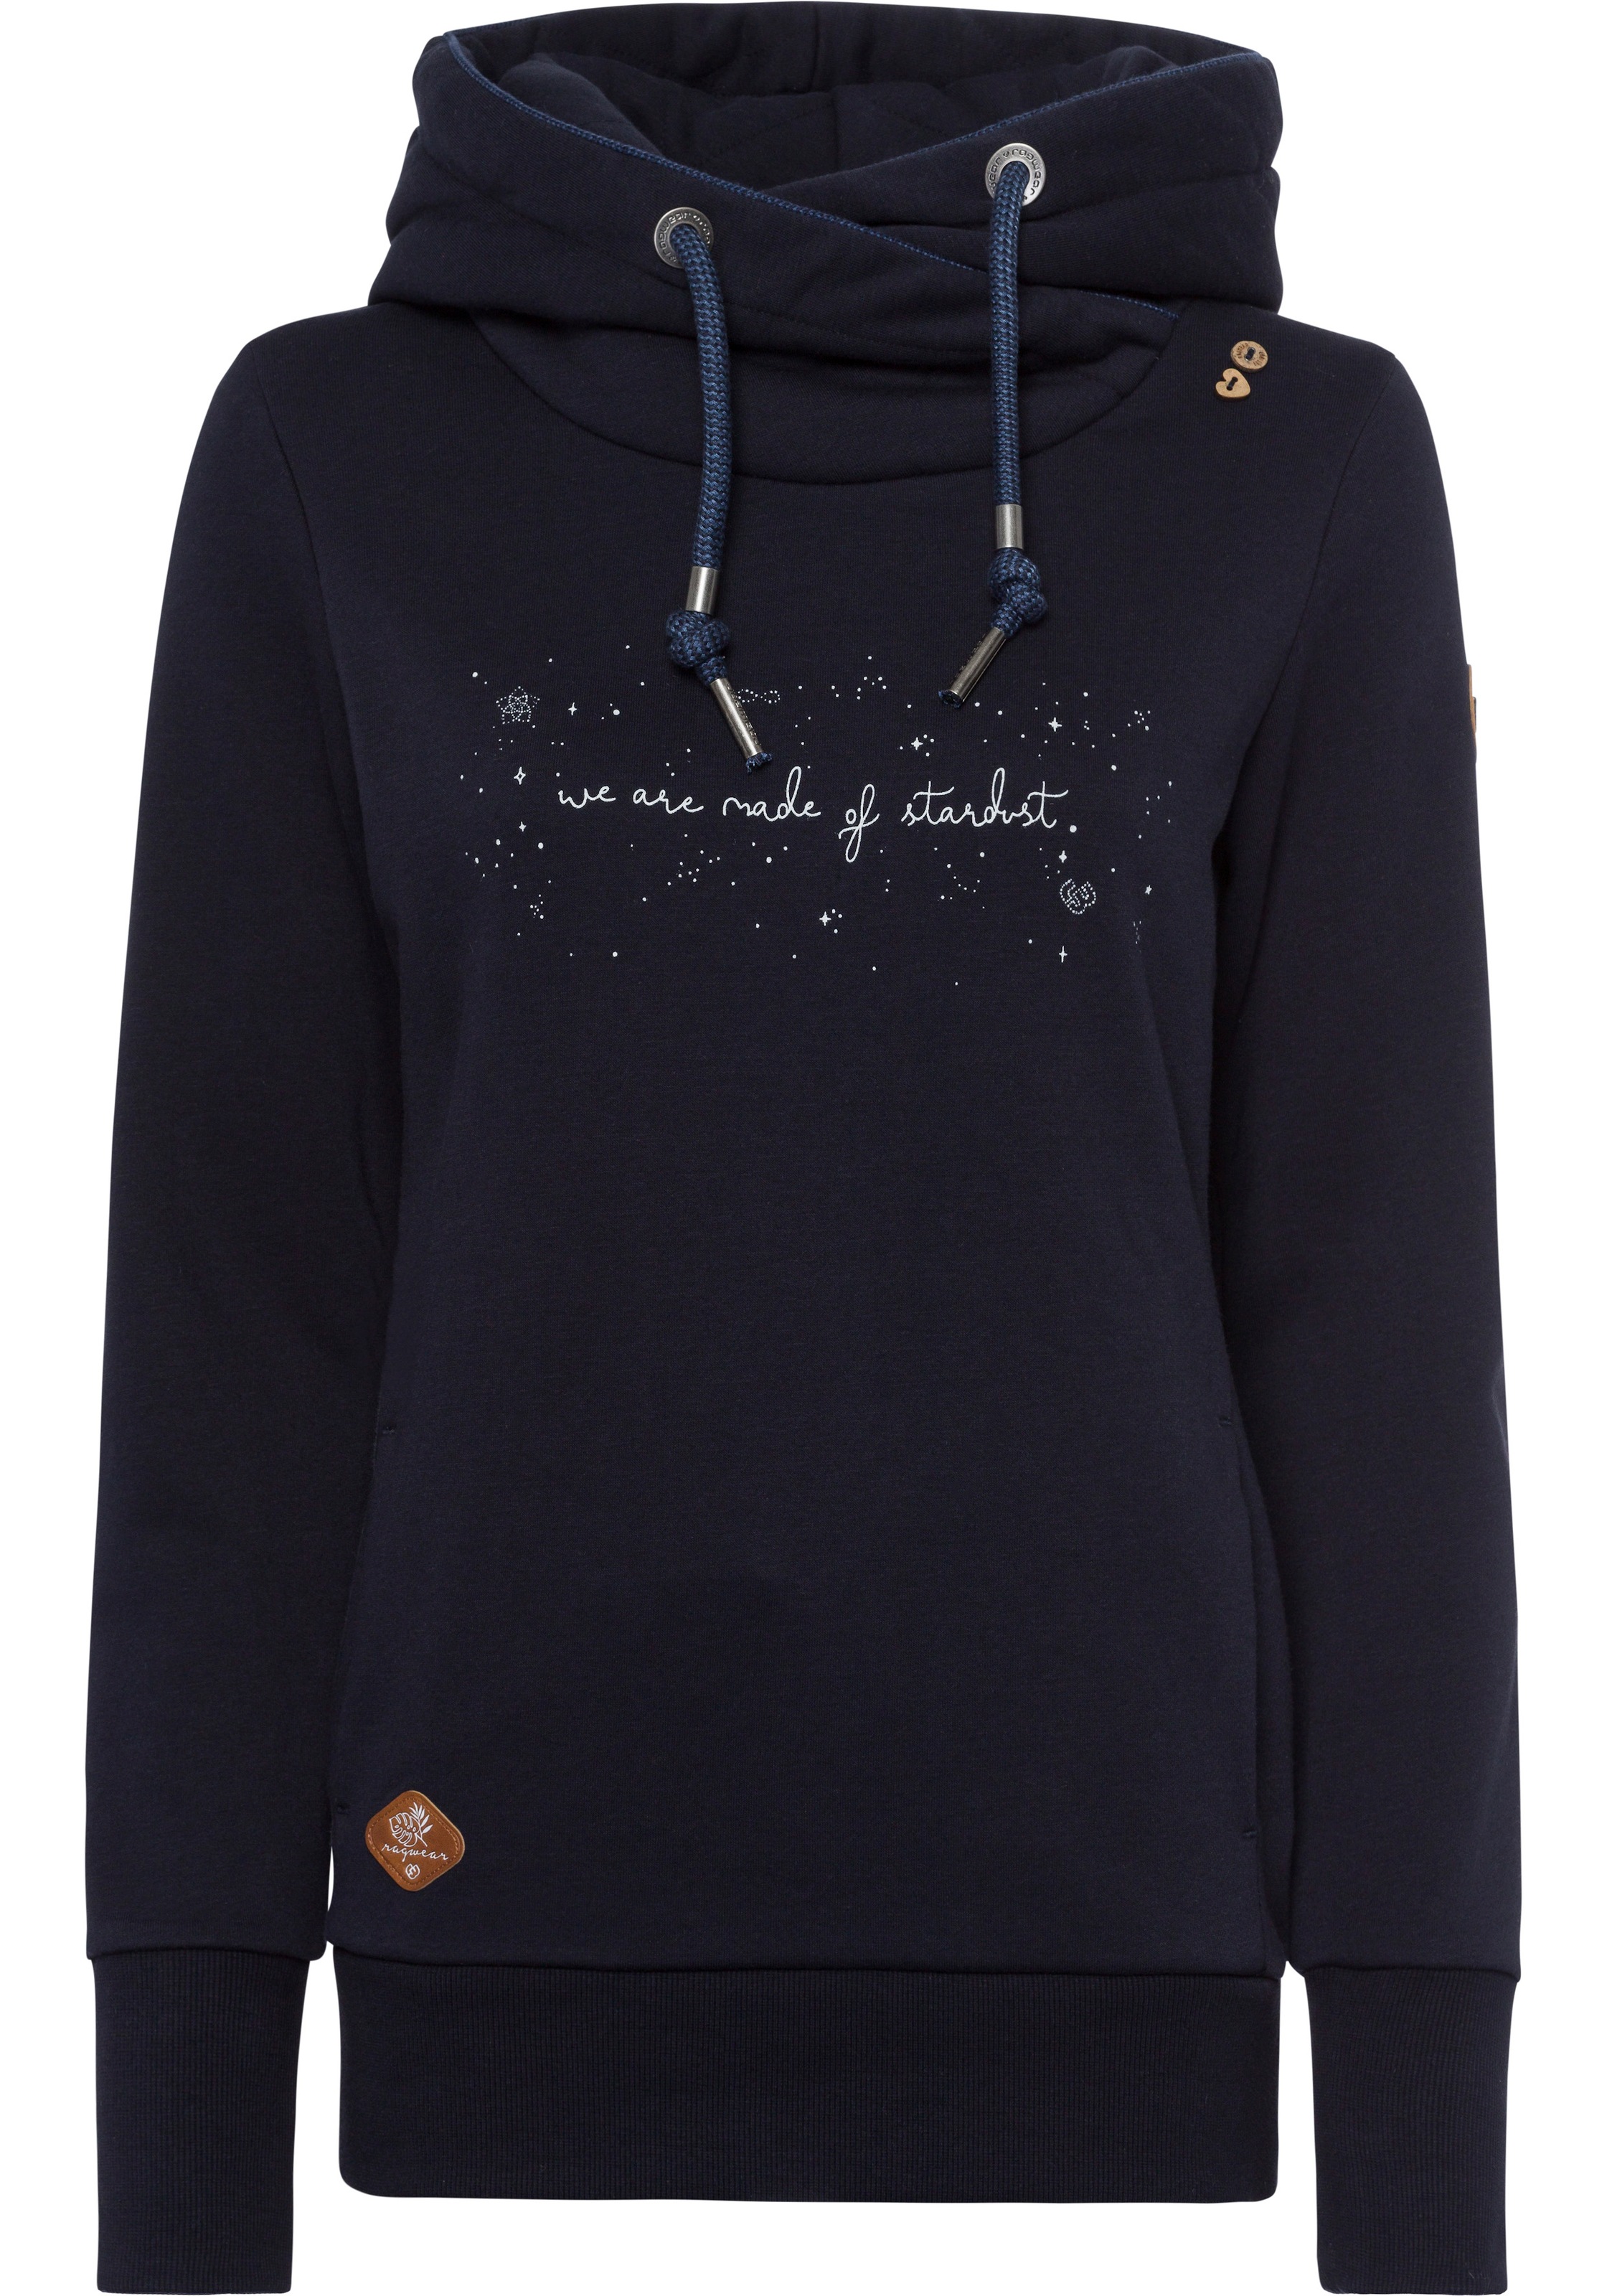 Ragwear Sweater »GRIPY BUTTON O STARDUST«, mit Statement-Front-Print "We are made of Stardust"